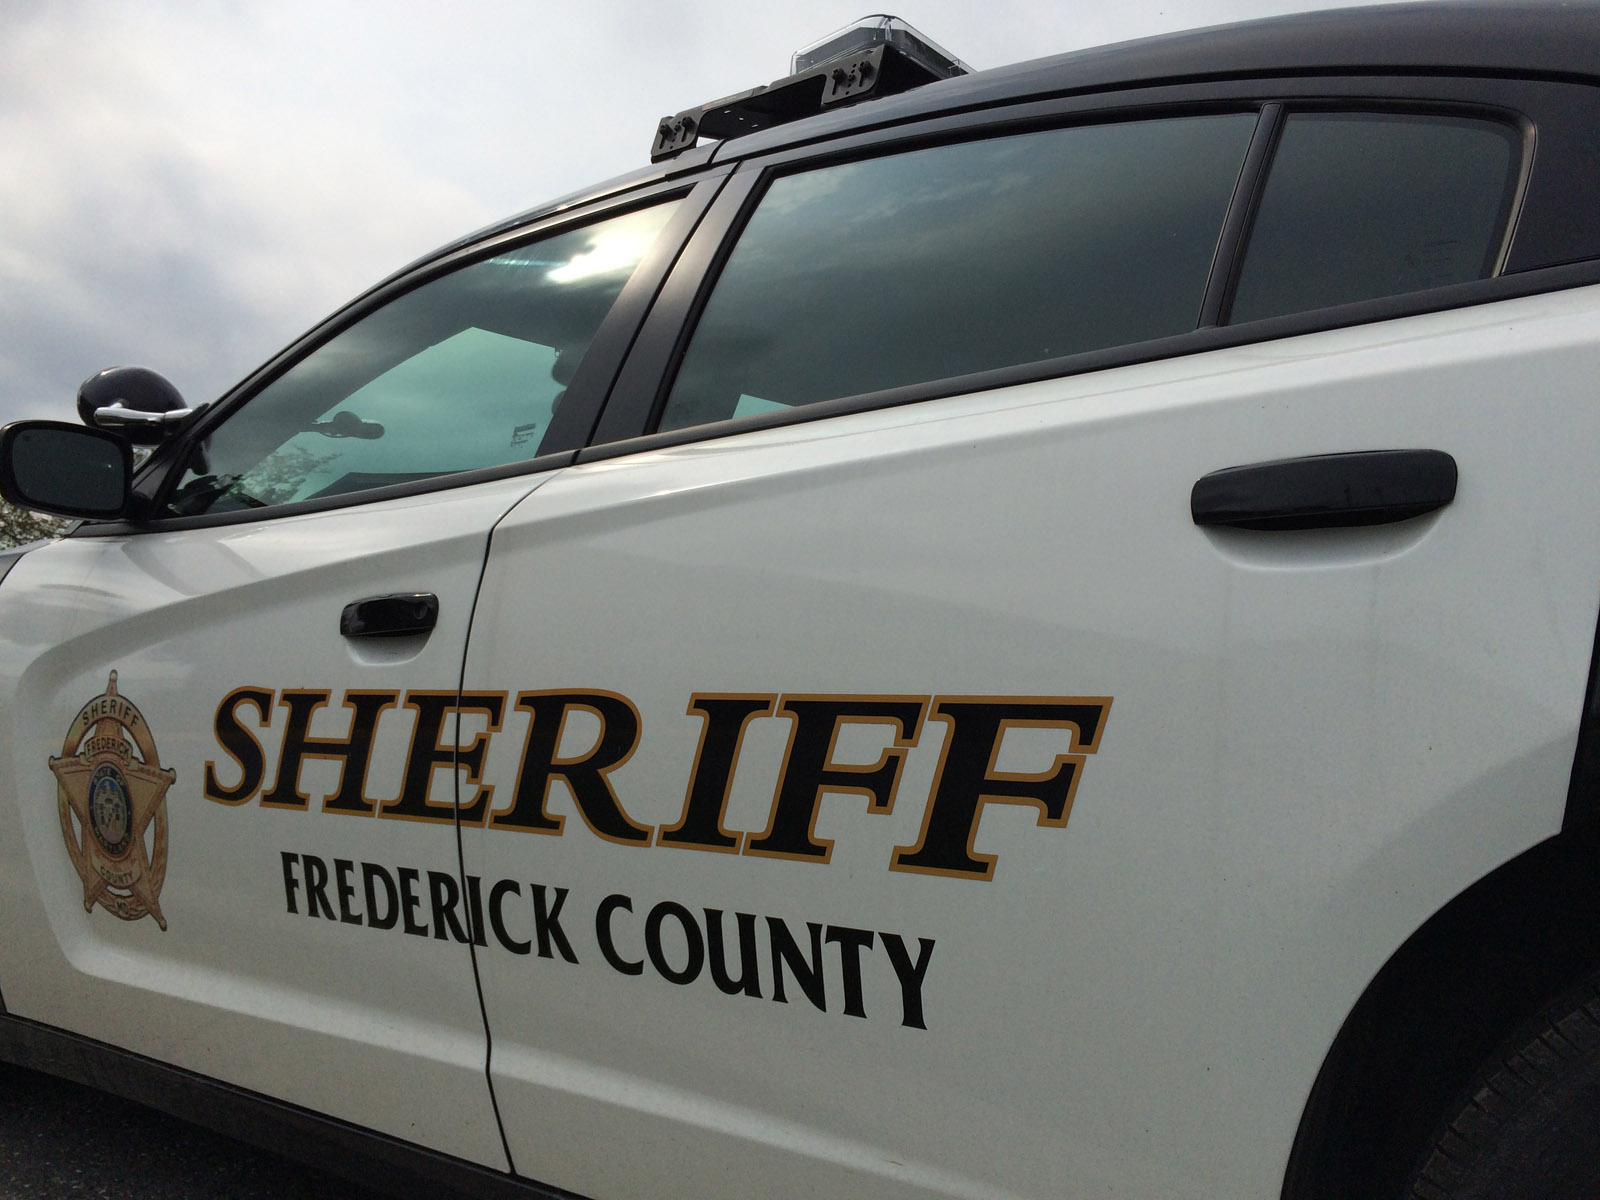 Possible human remains found in a shallow grave in Frederick Co.